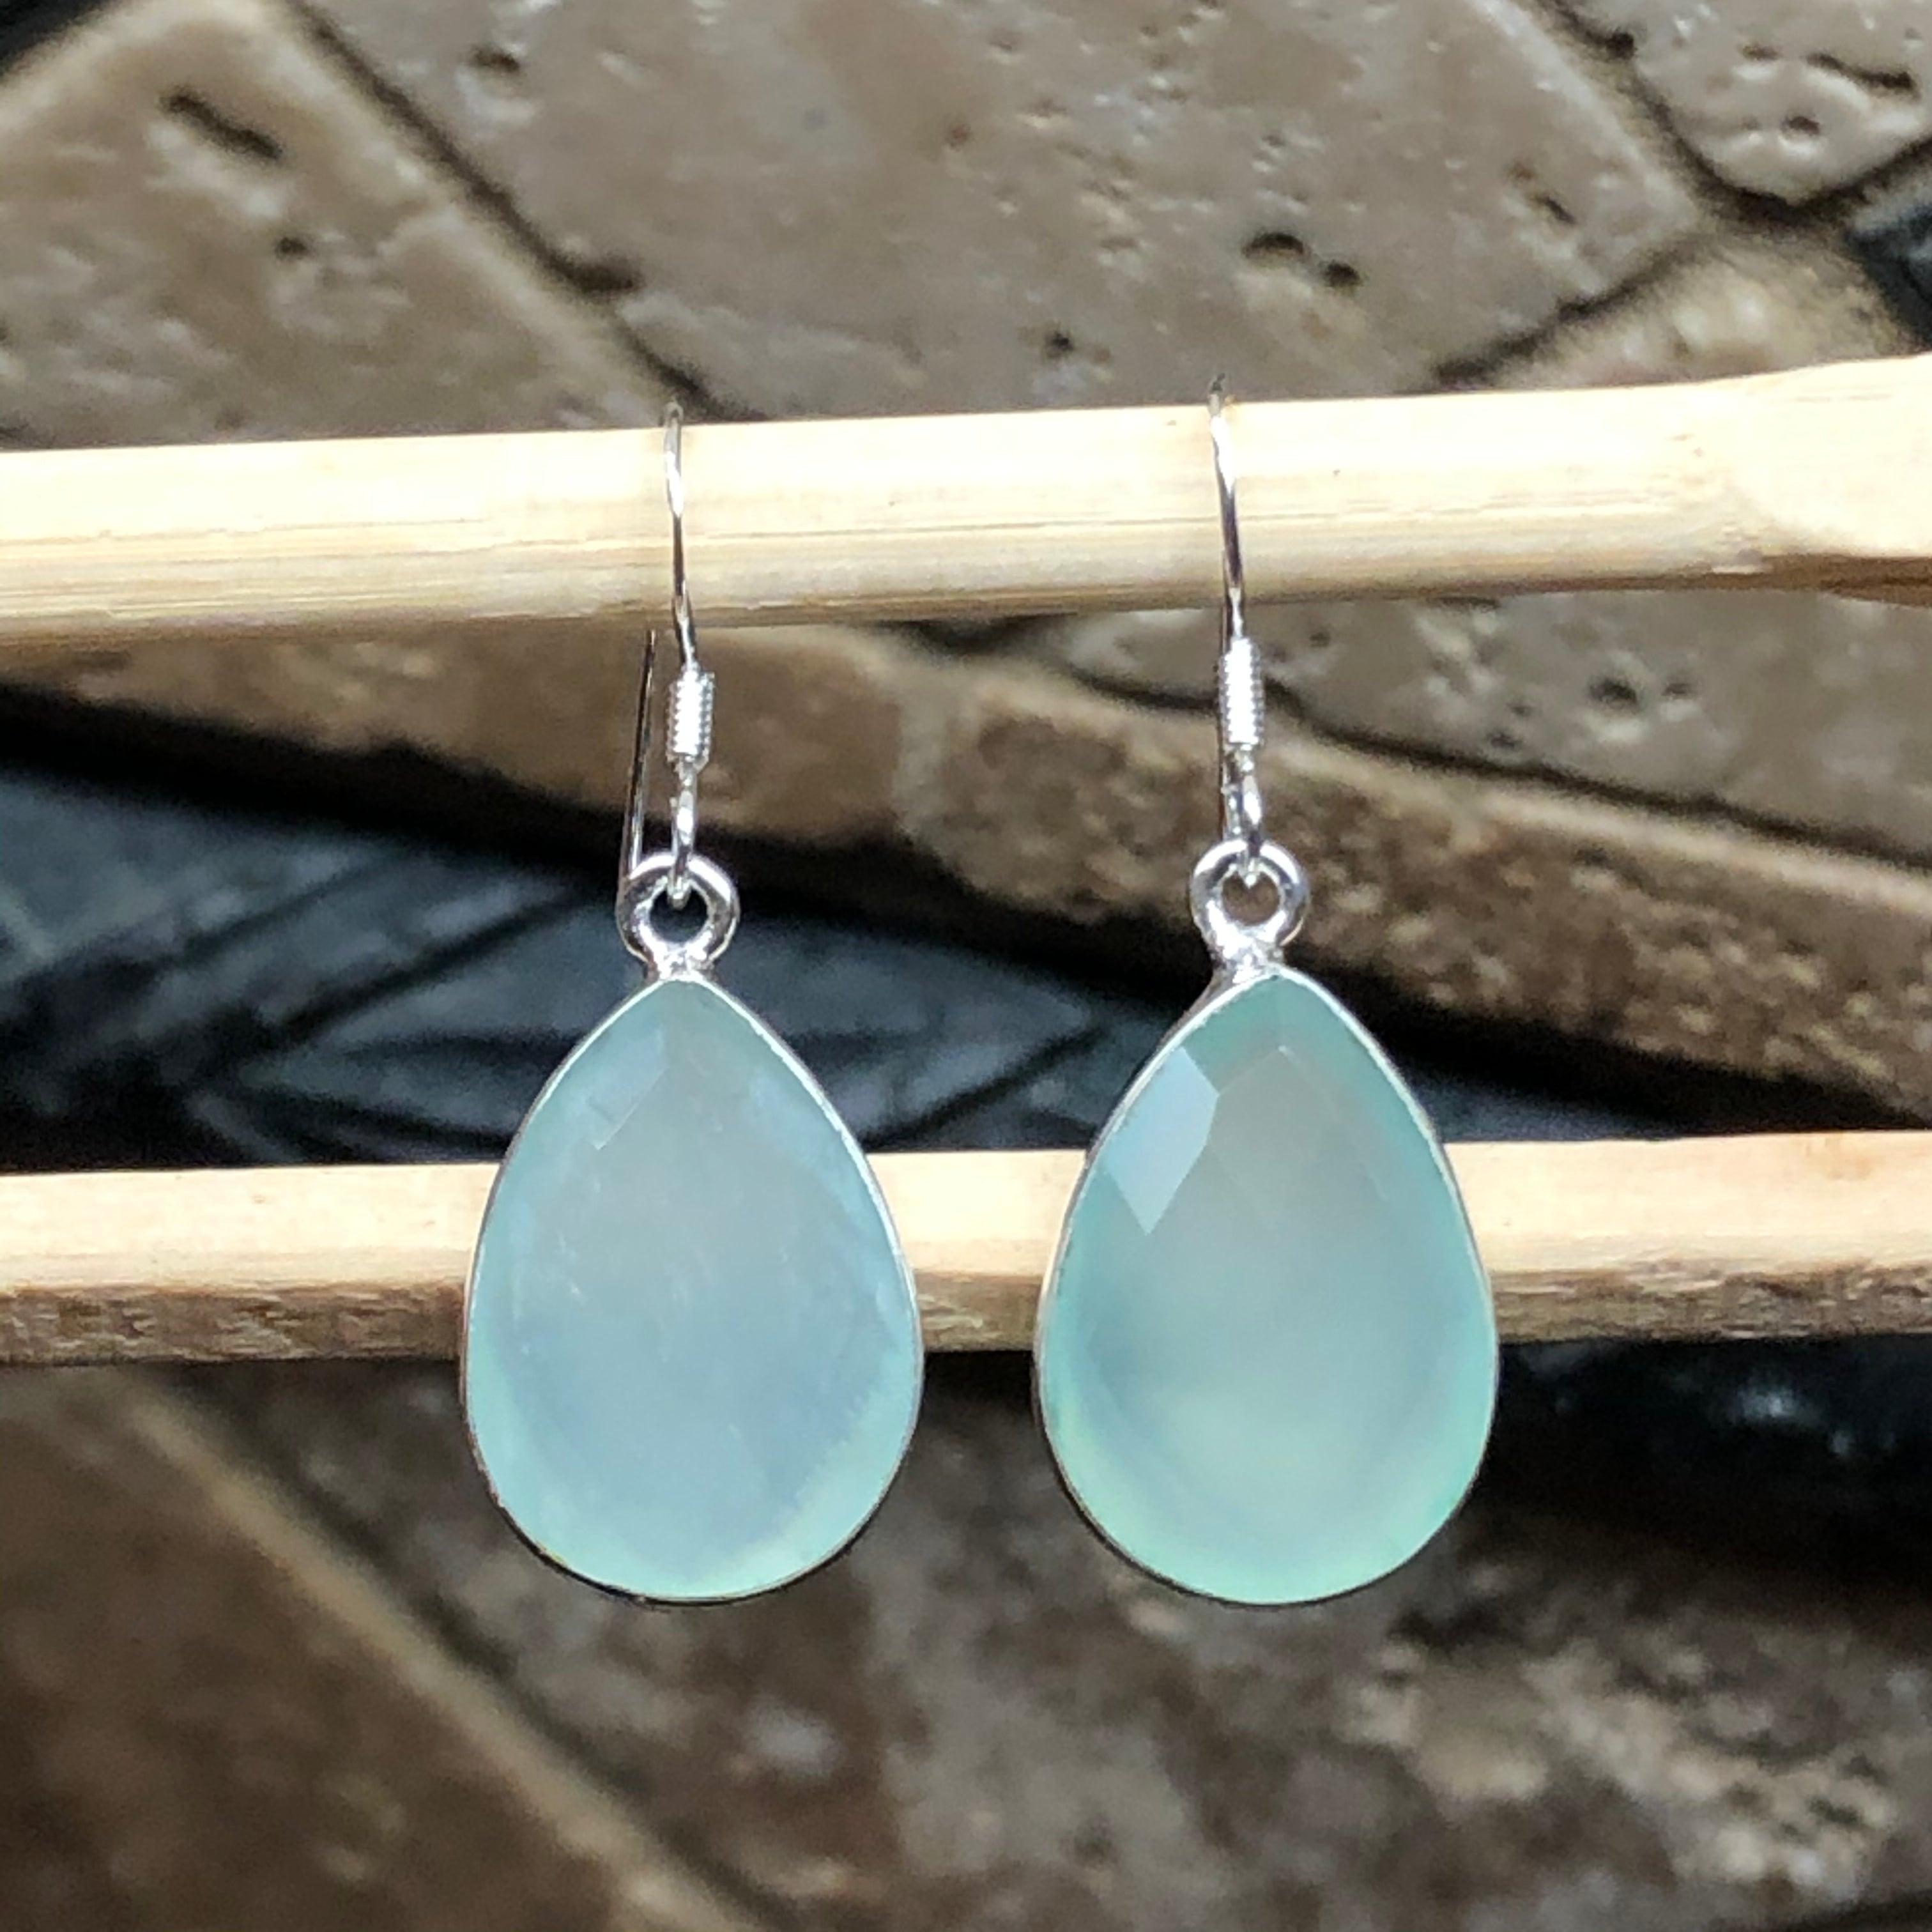 Natural Aqua Chalcedony 925 Solid Sterling Silver Earrings 30mm - Natural Rocks by Kala